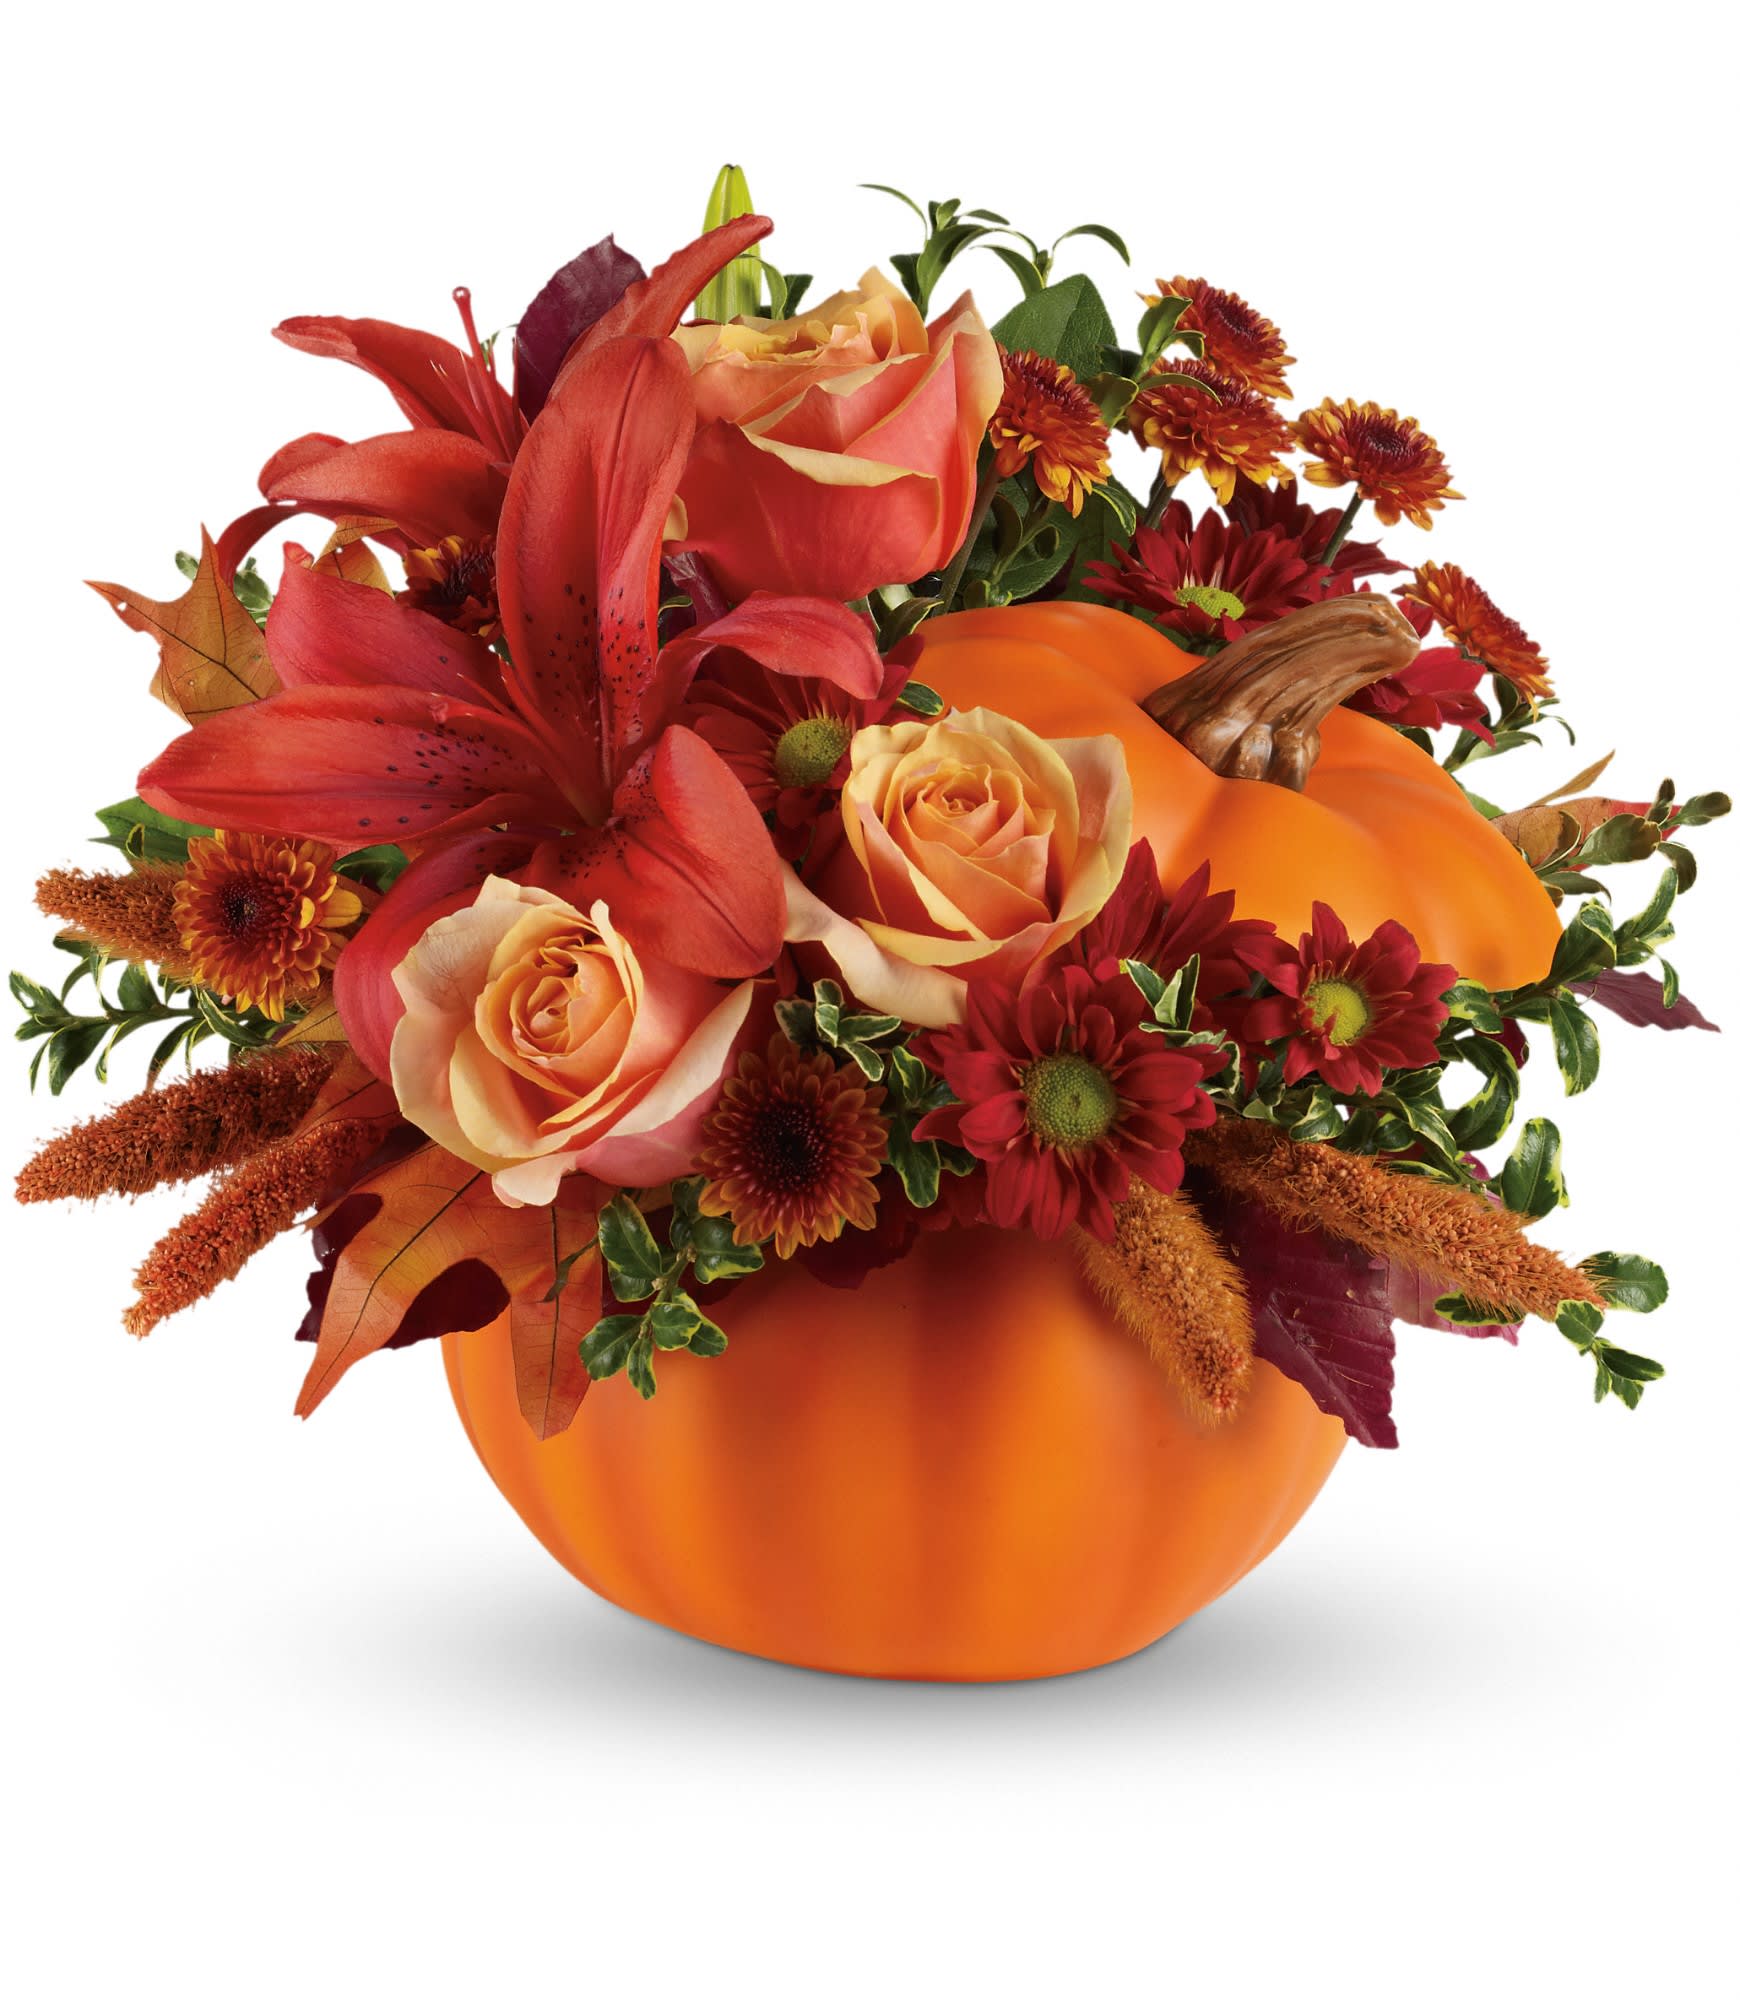 Autumn's Joy by Teleflora - This rustic arrangement includes orange roses and asiatic lilies, bronze button spray chrysanthemums and red daisy spray chrysanthemums, finished with accents of burgundy copper beech, brown china millet, and brown and yellow oak leaves. Delivered in a ceramic pumpkin. Approximately 13 1/2&quot; W x 12&quot; H. T12H110A 